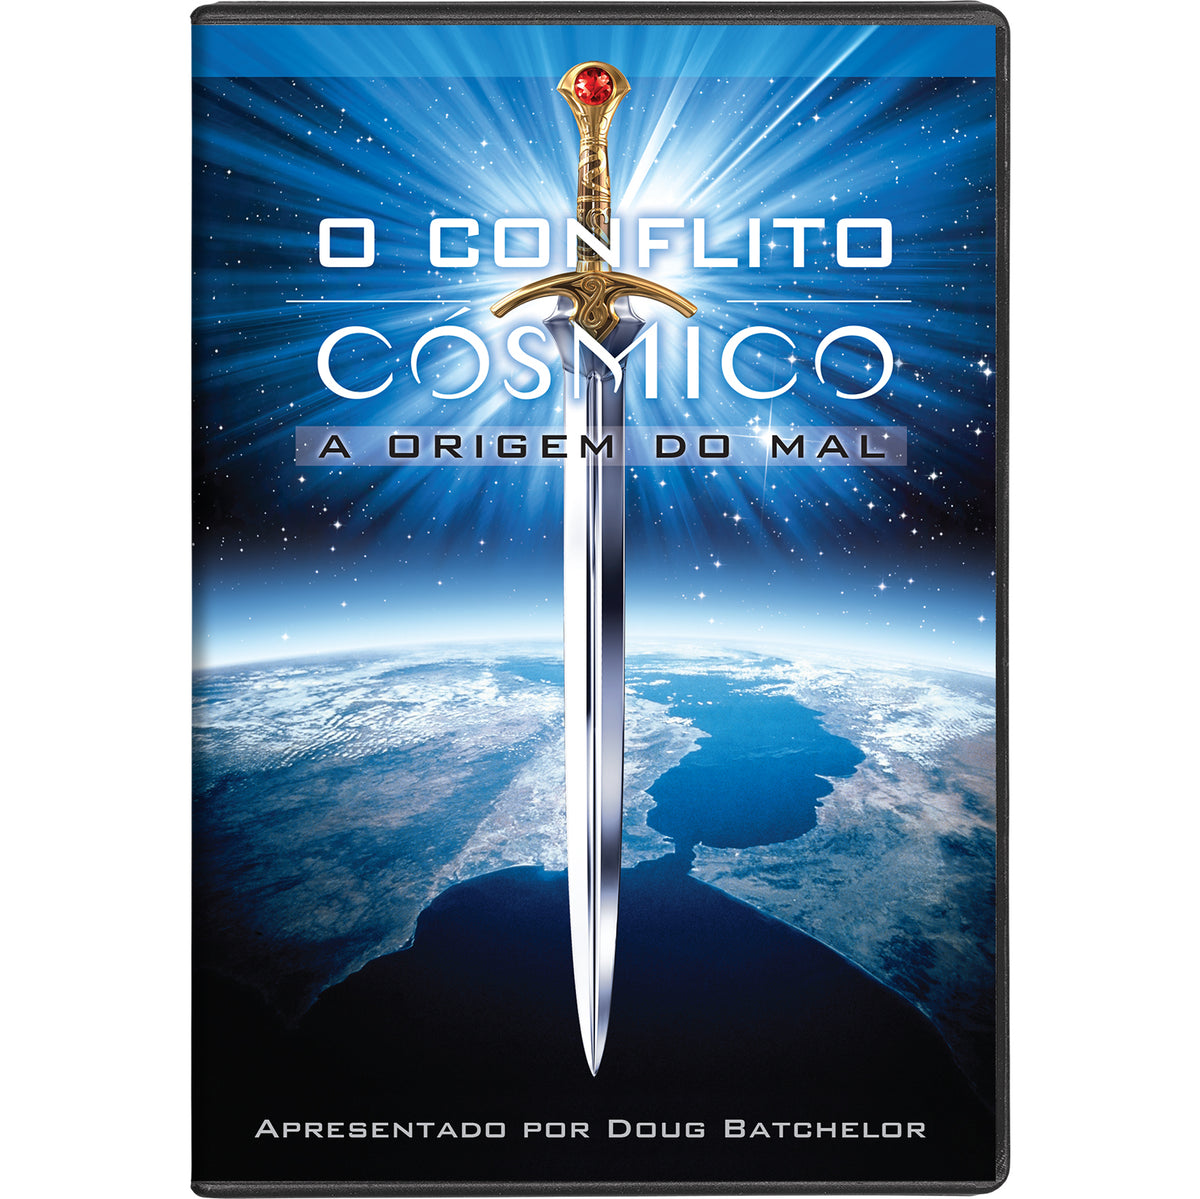 O Conflicto Cosmico (Cosmic Conflict: The Origin of Evil -Portuguese) by Doug Batchelor